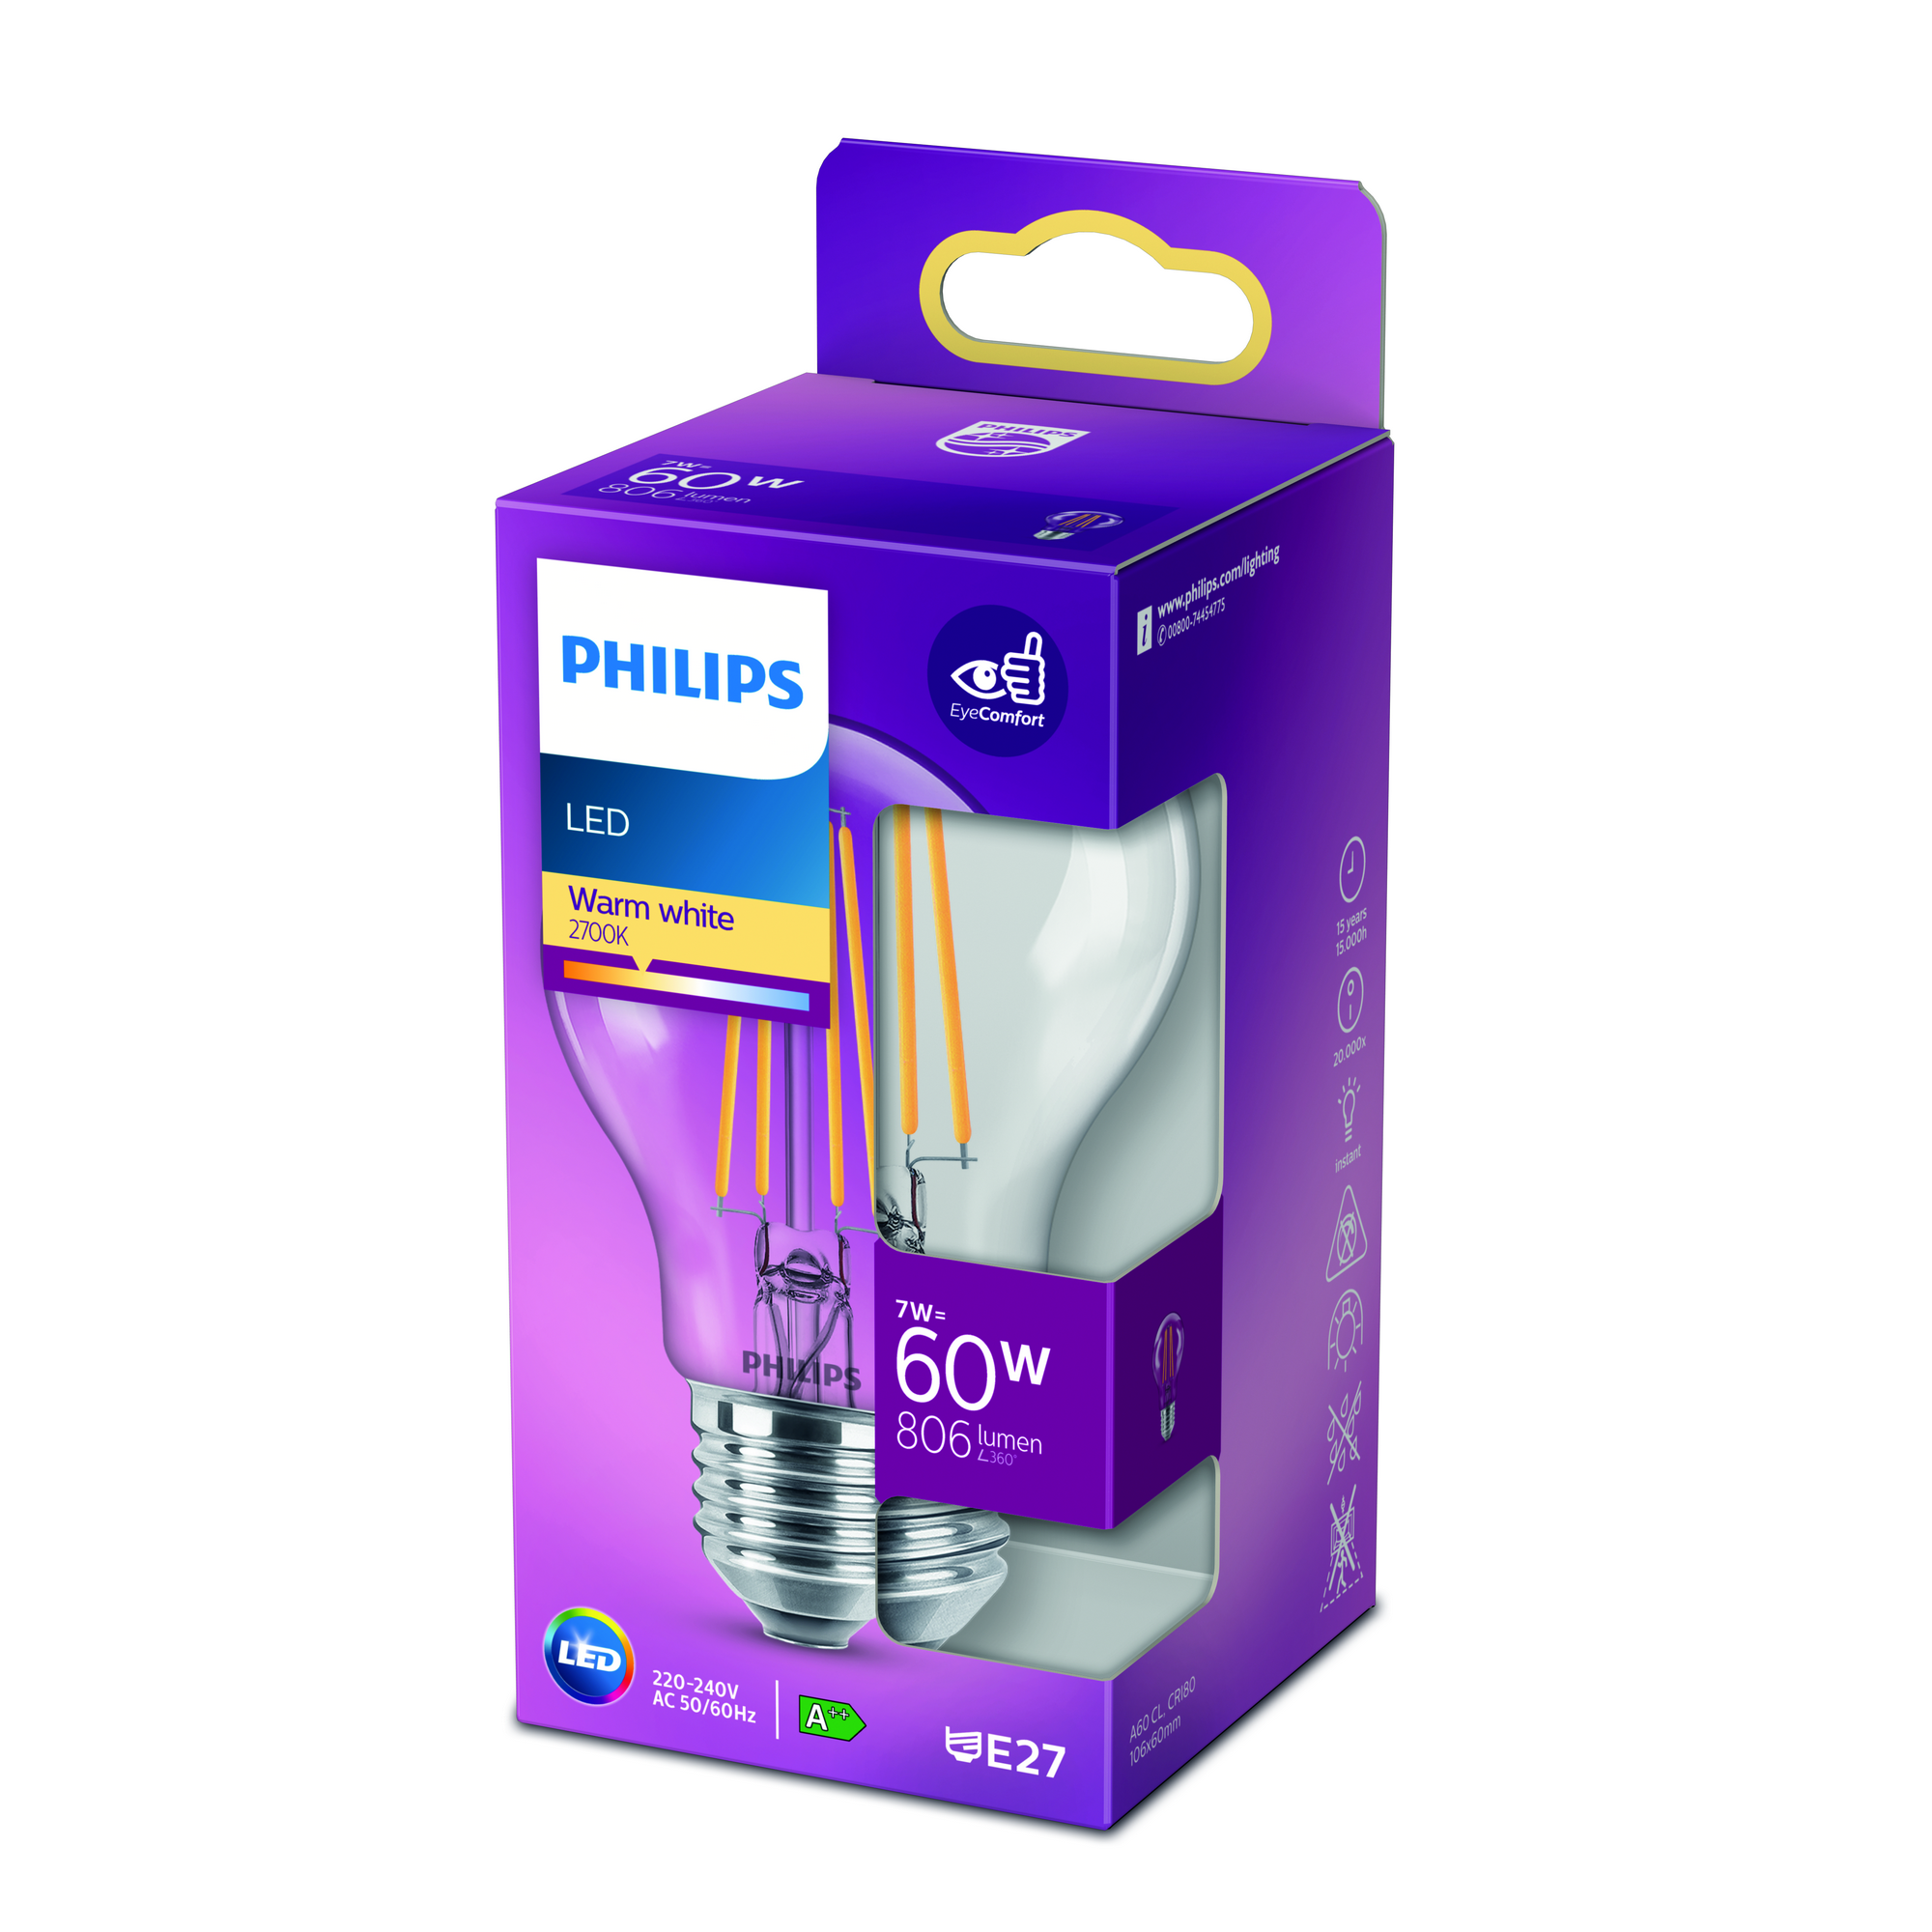 LED Lampe 7 W E27 warmweiß 806 lm klar + product picture